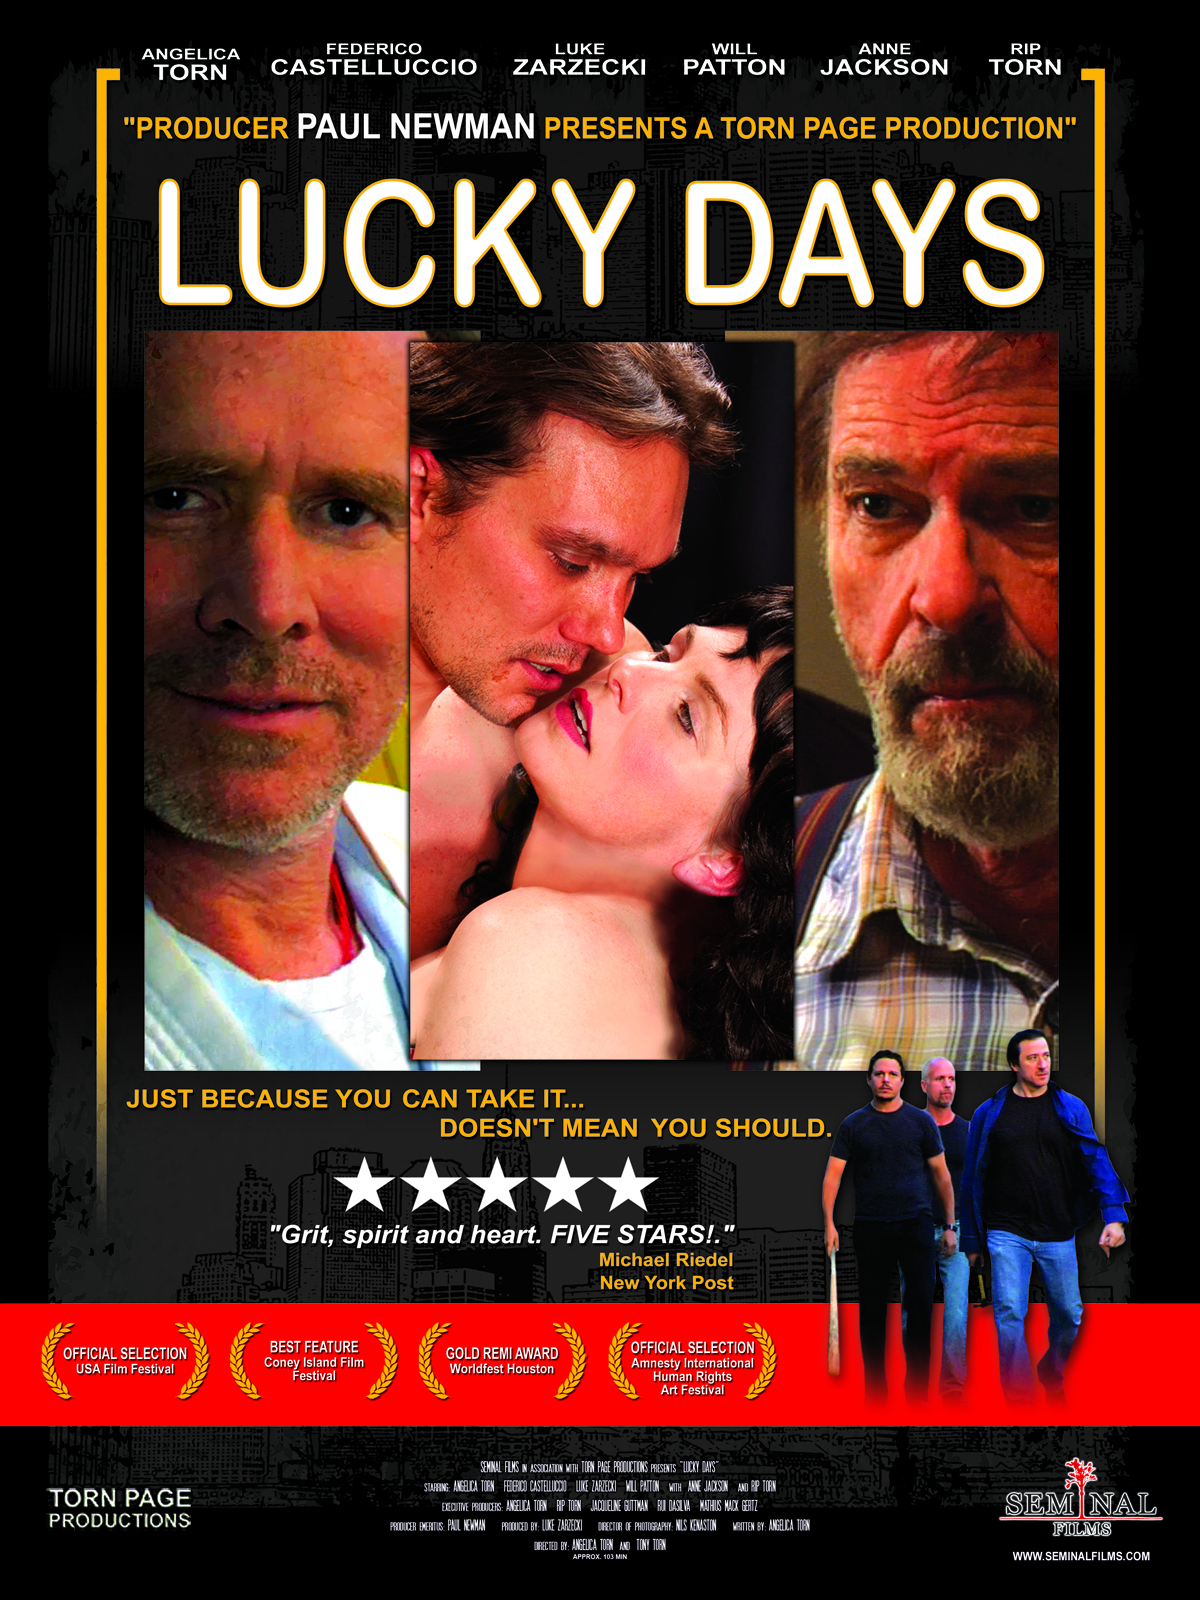 Poster for theatrical release of Lucky Days and DVD cover.